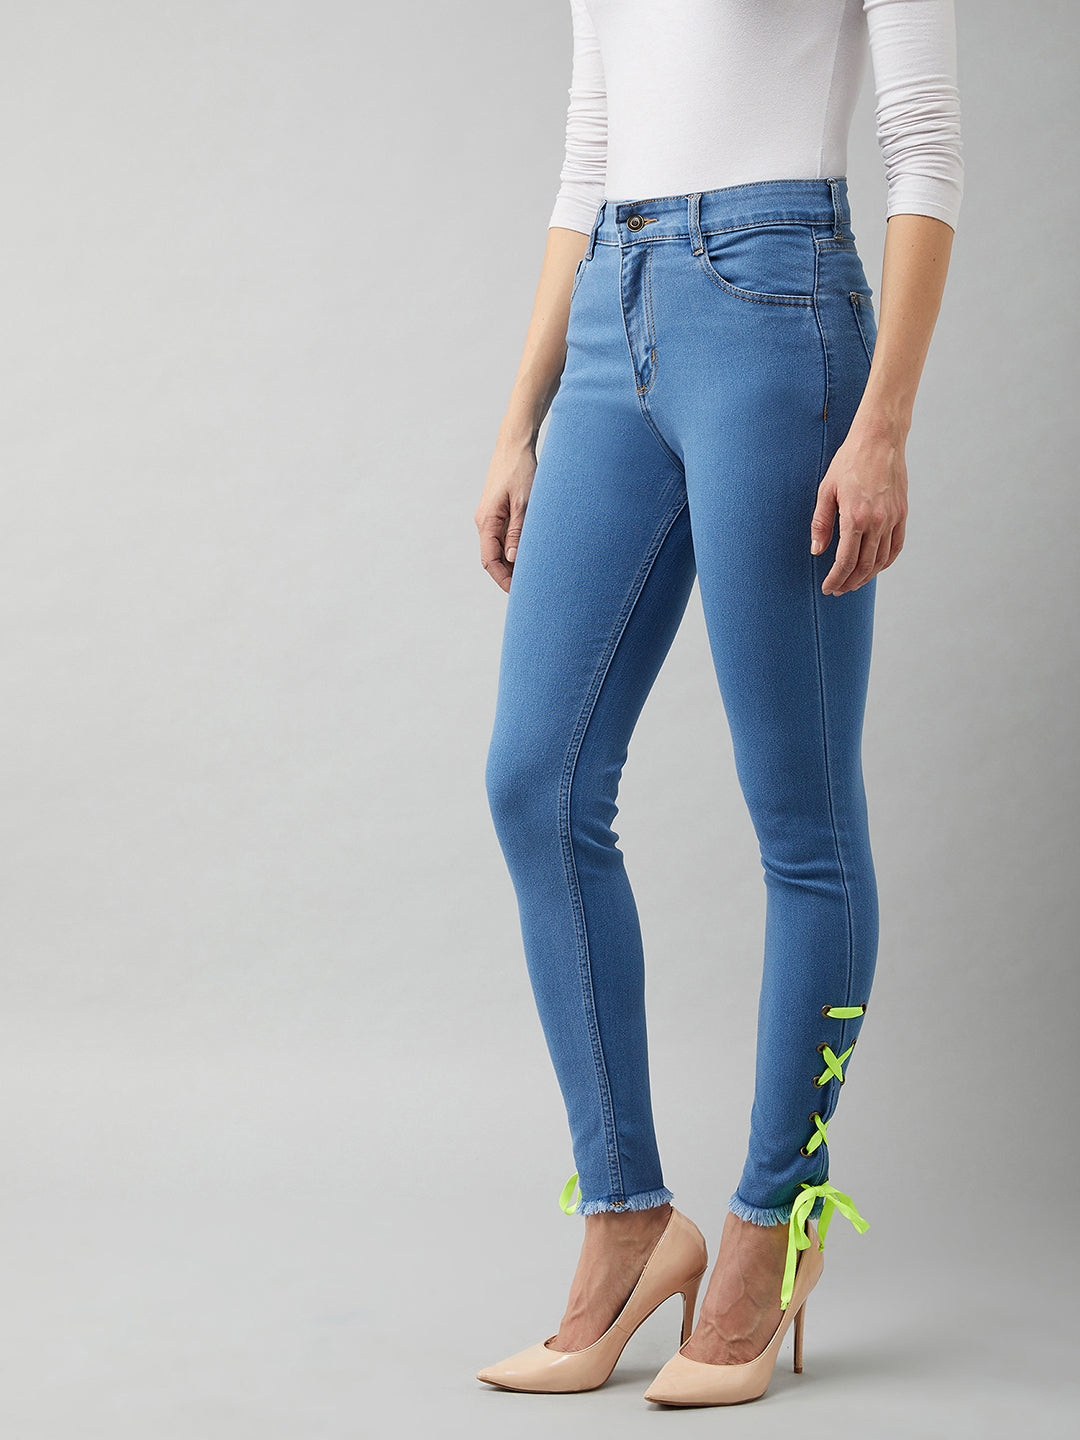 Blue Cotton Skinny Fit High Rise Stretchable Denim Jeans